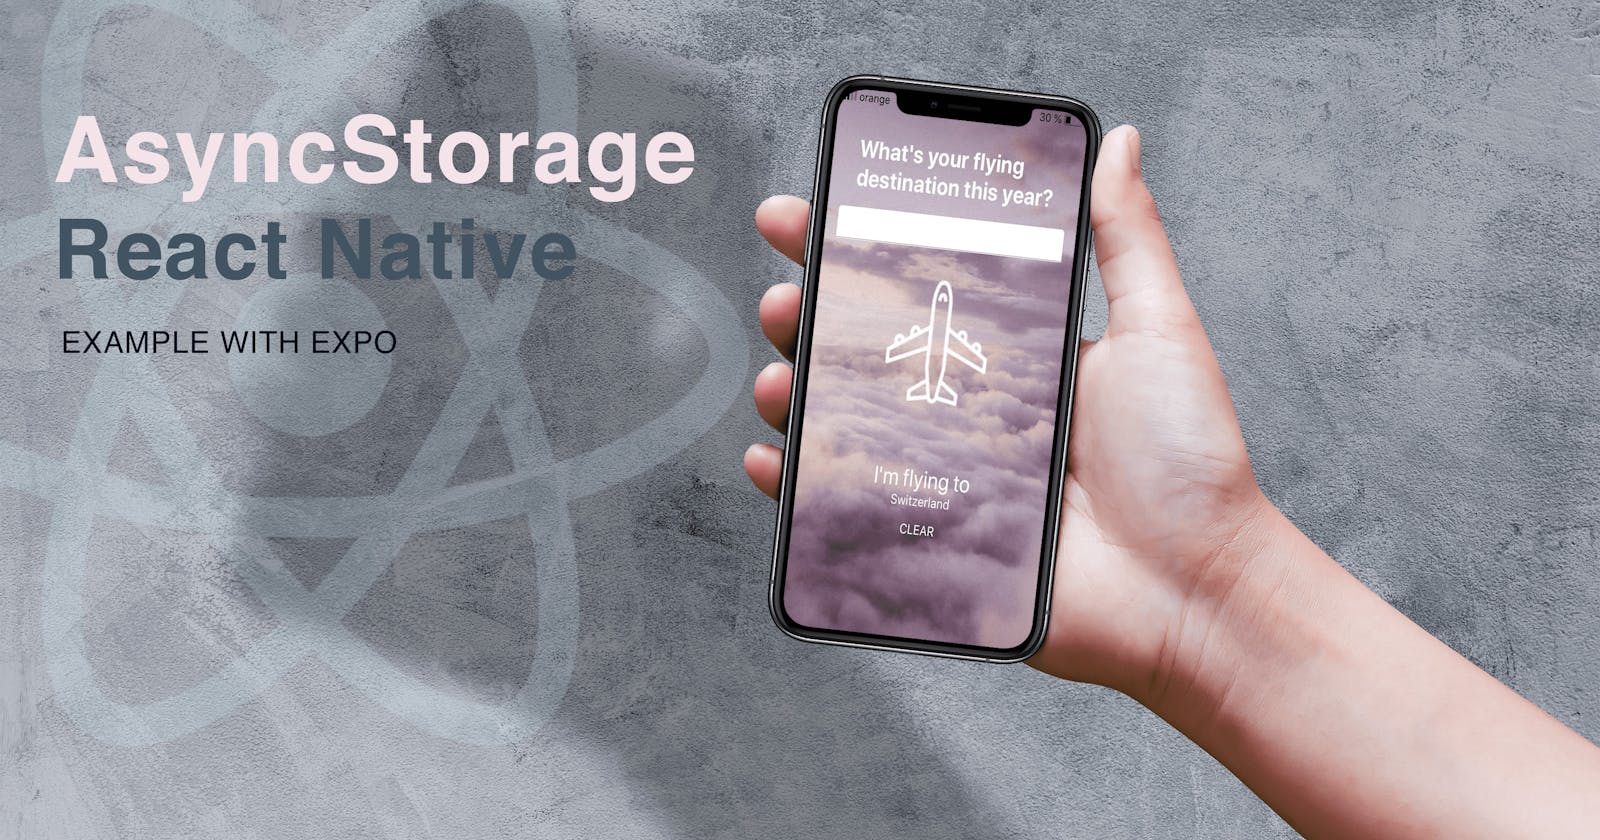 How to use AsyncStorage in React Native